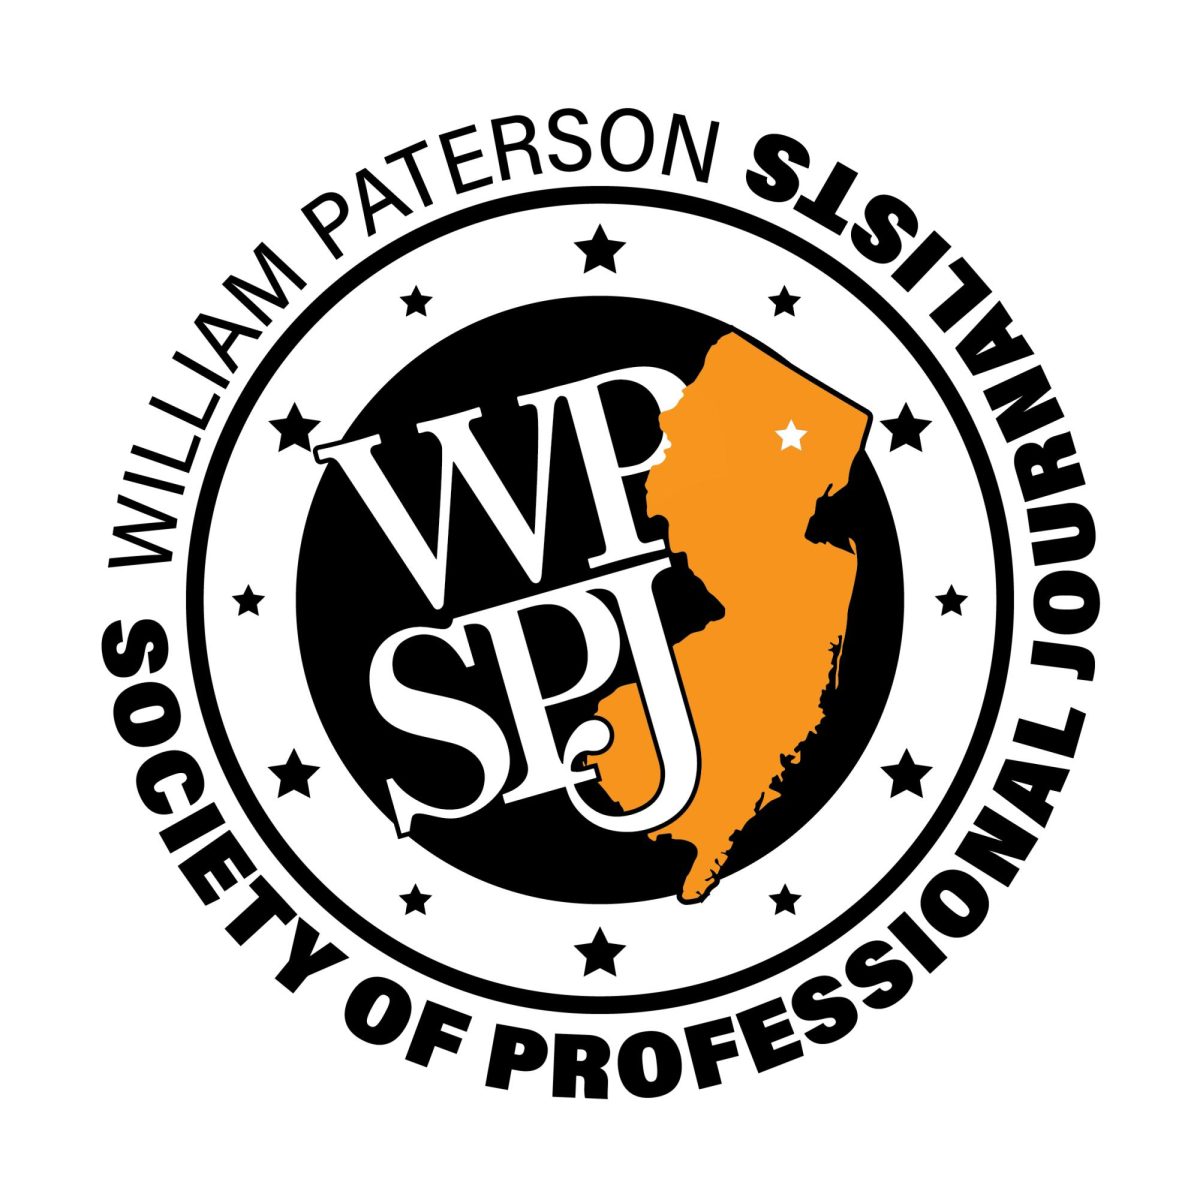 William Paterson Society of Professional Journalists won the 2023 National Campus Chapter of the Year